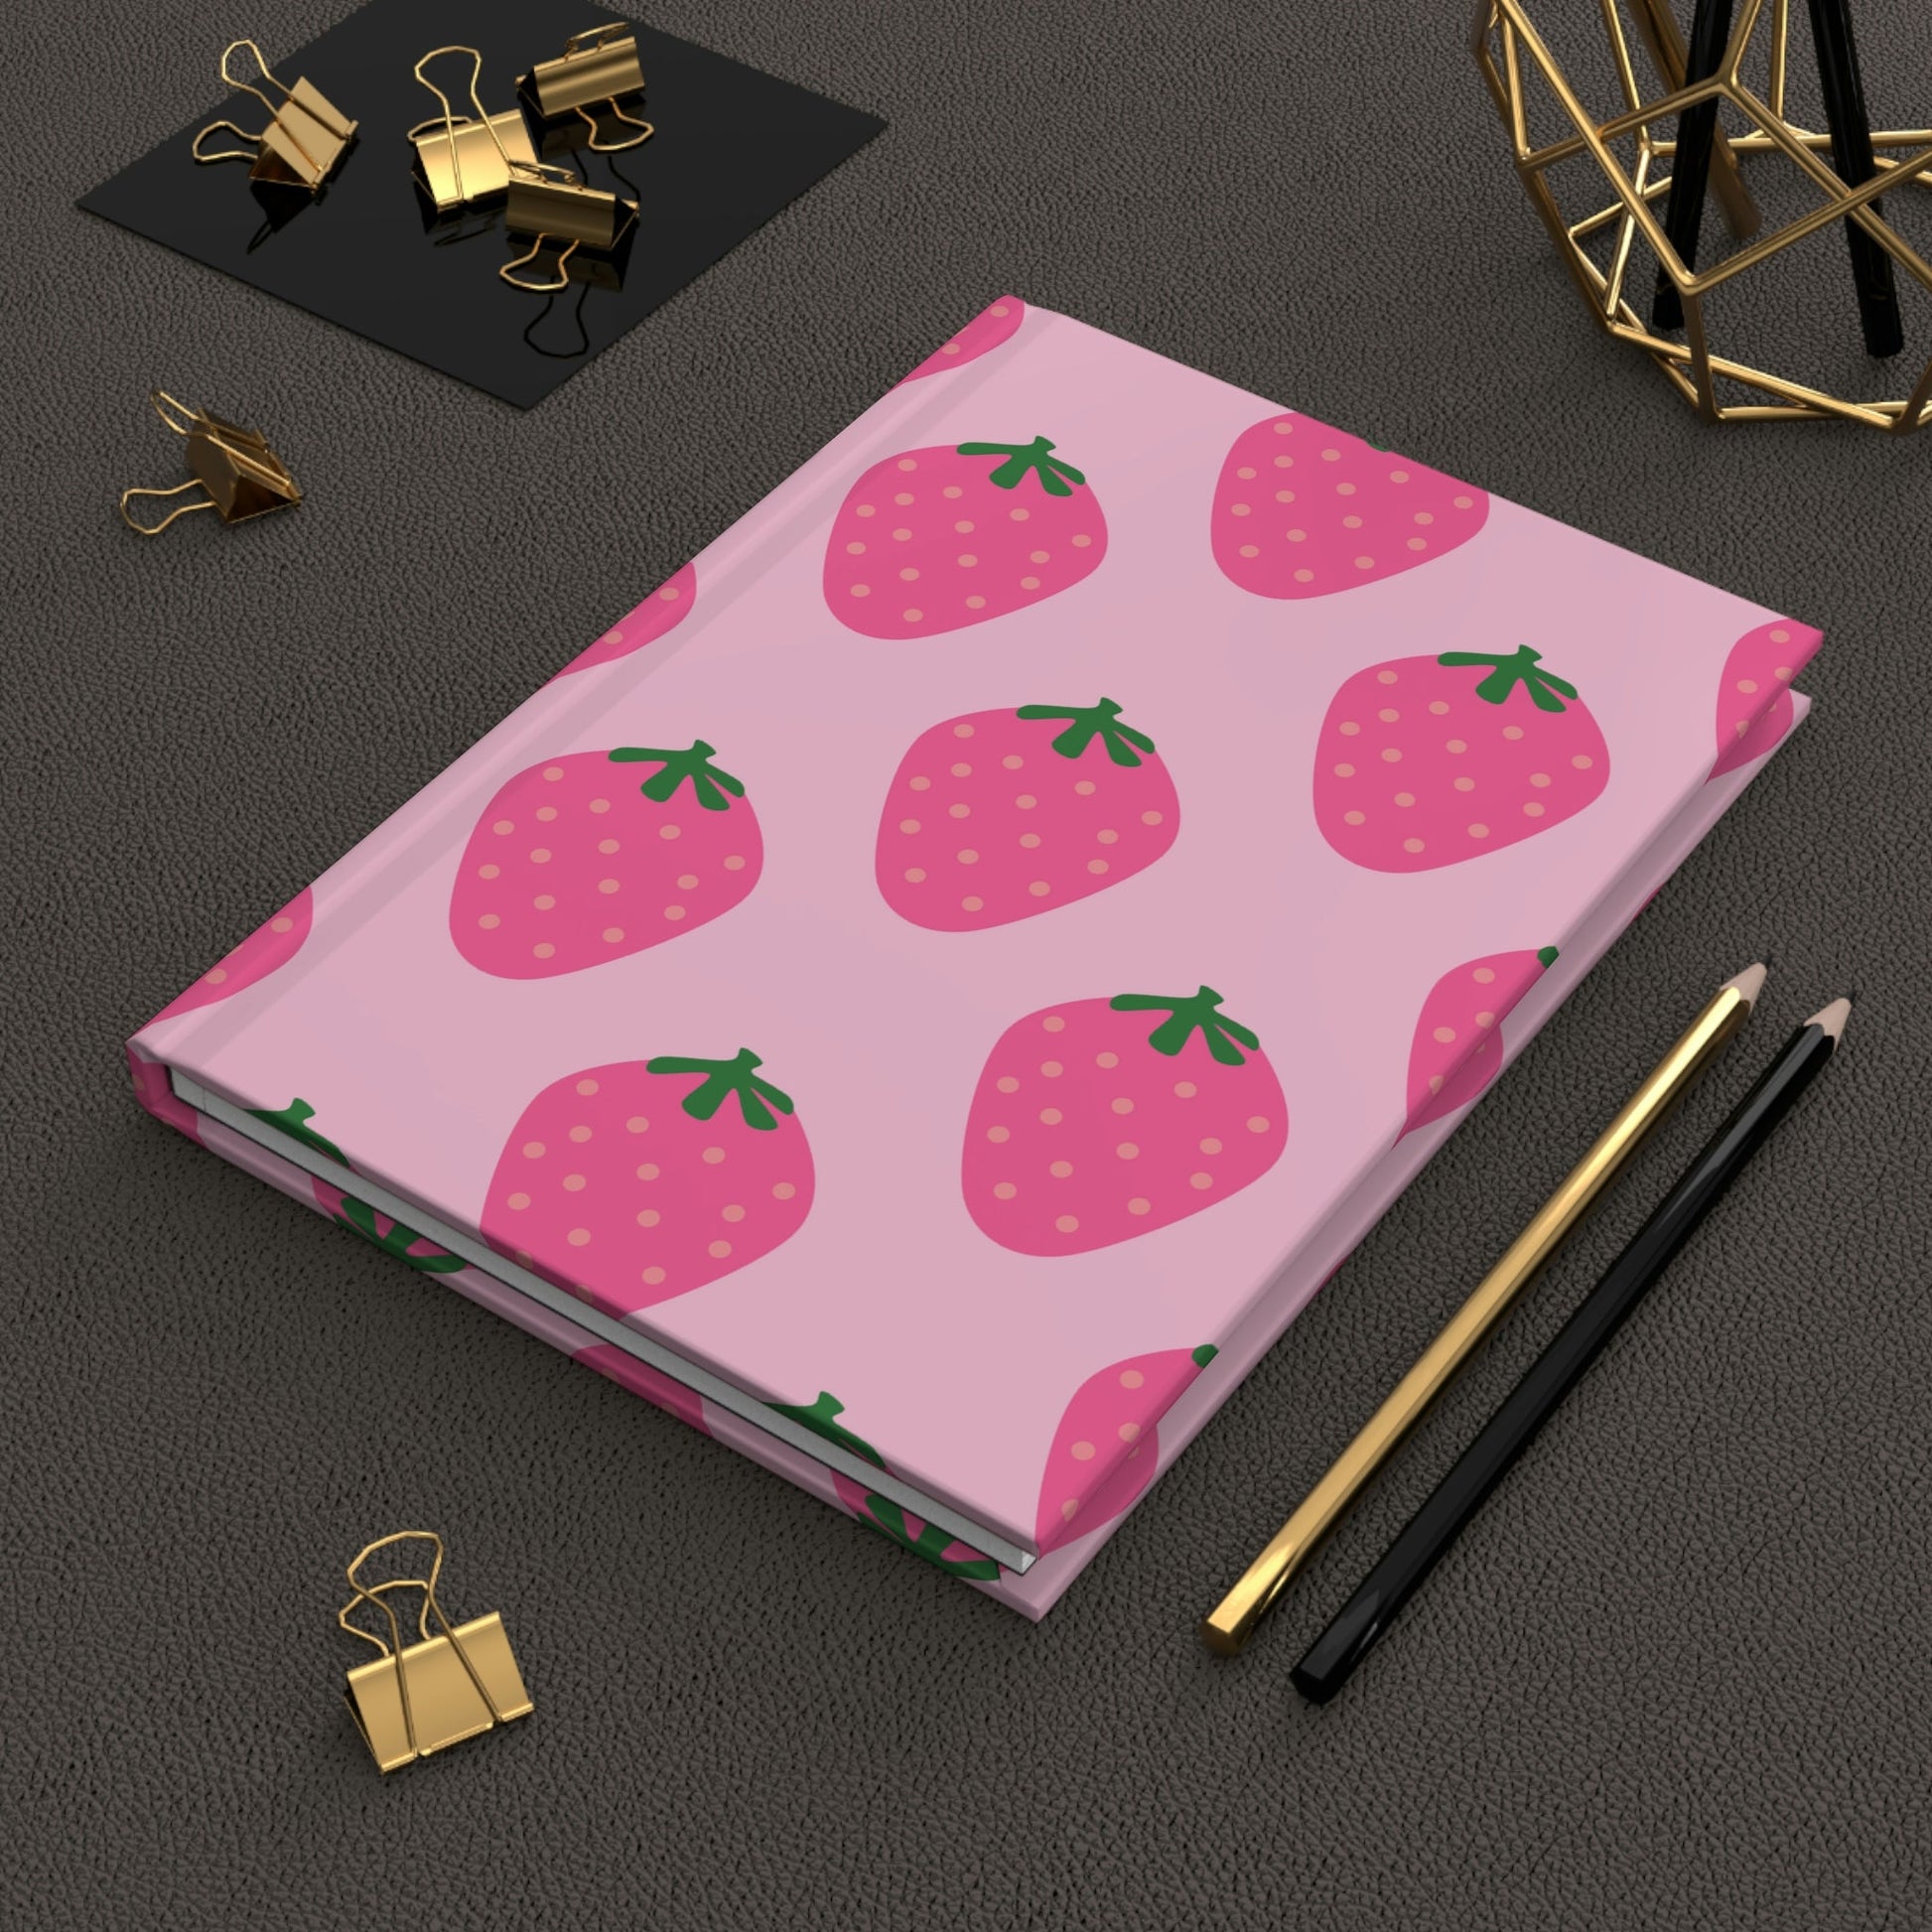 Succulent Strawberries Hardcover Matte Journal Paper products Pink Sweetheart